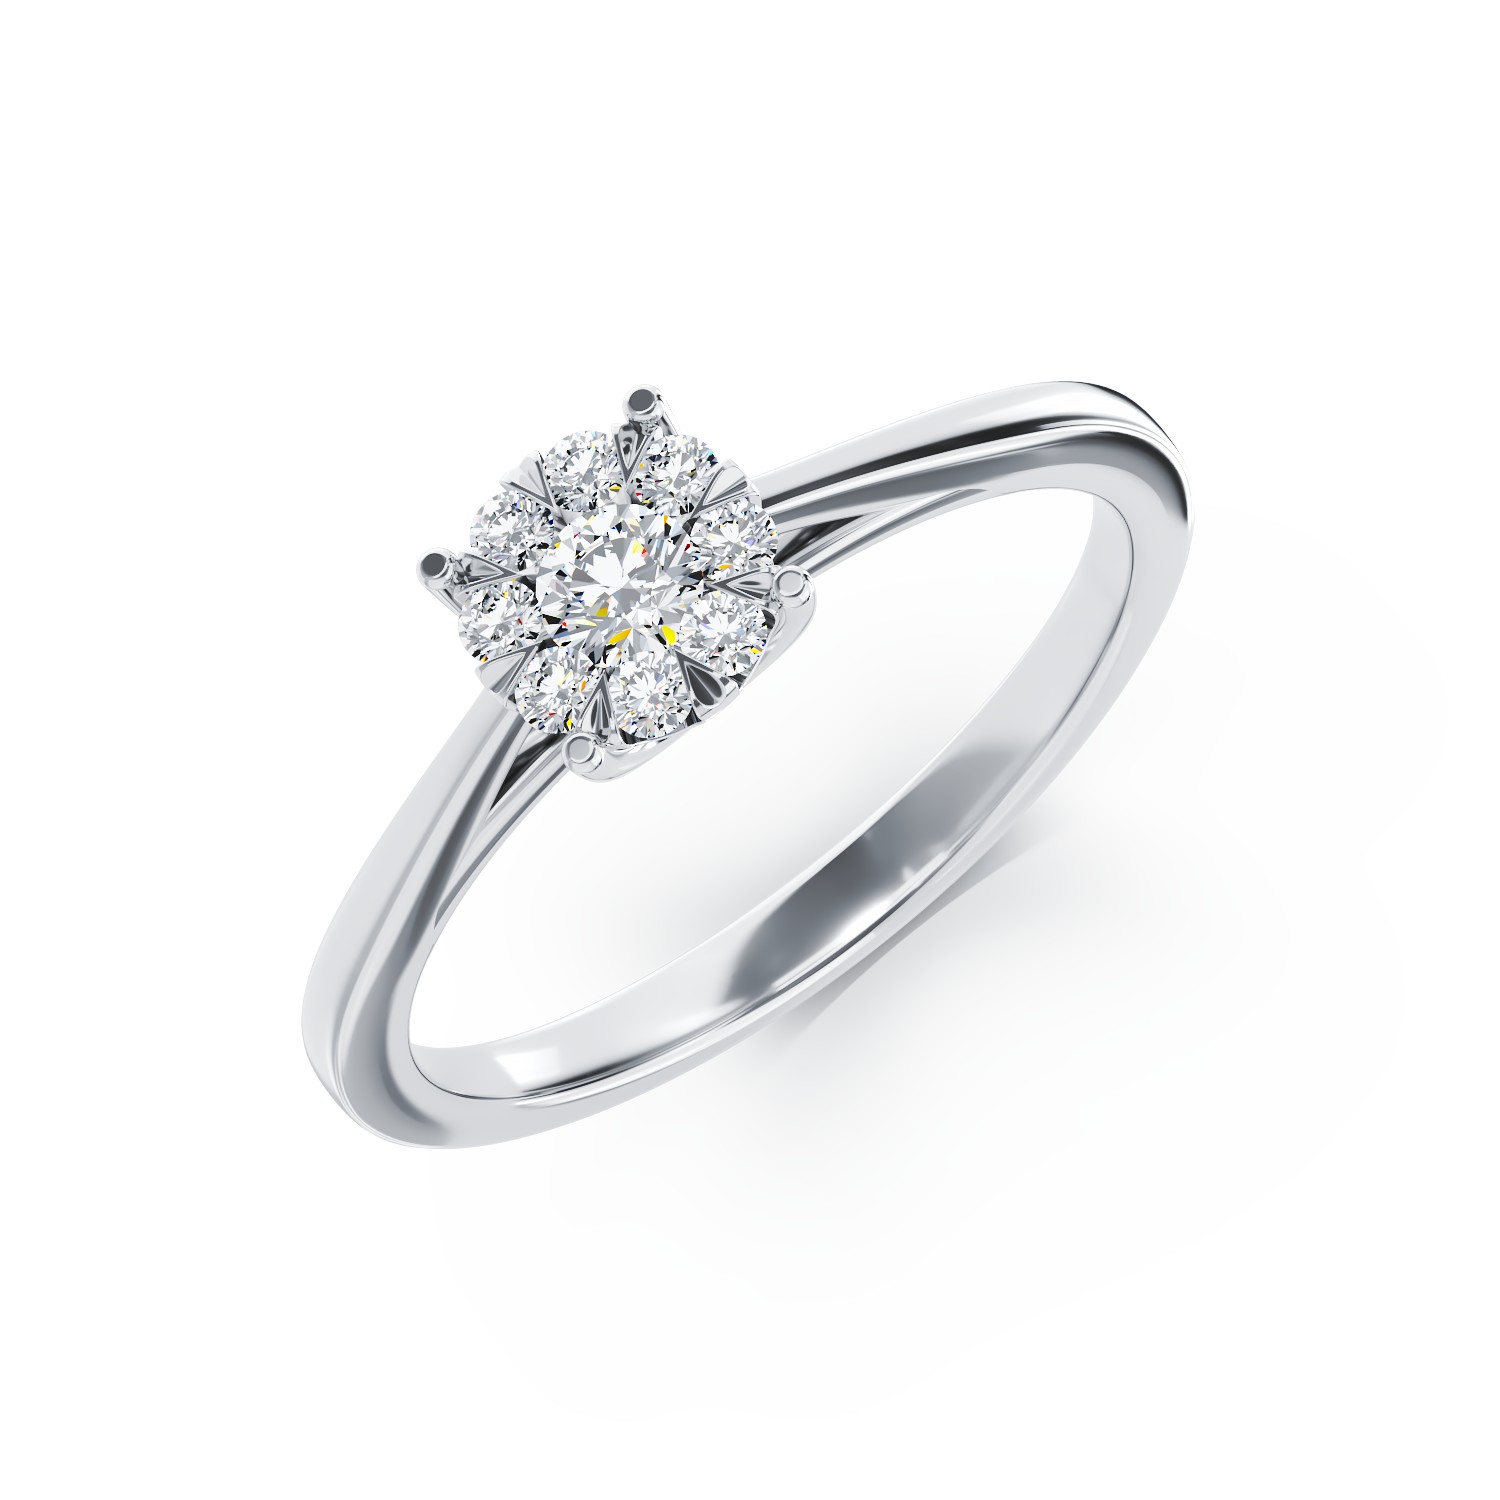 14K white gold engagement ring with 0.10ct diamonds